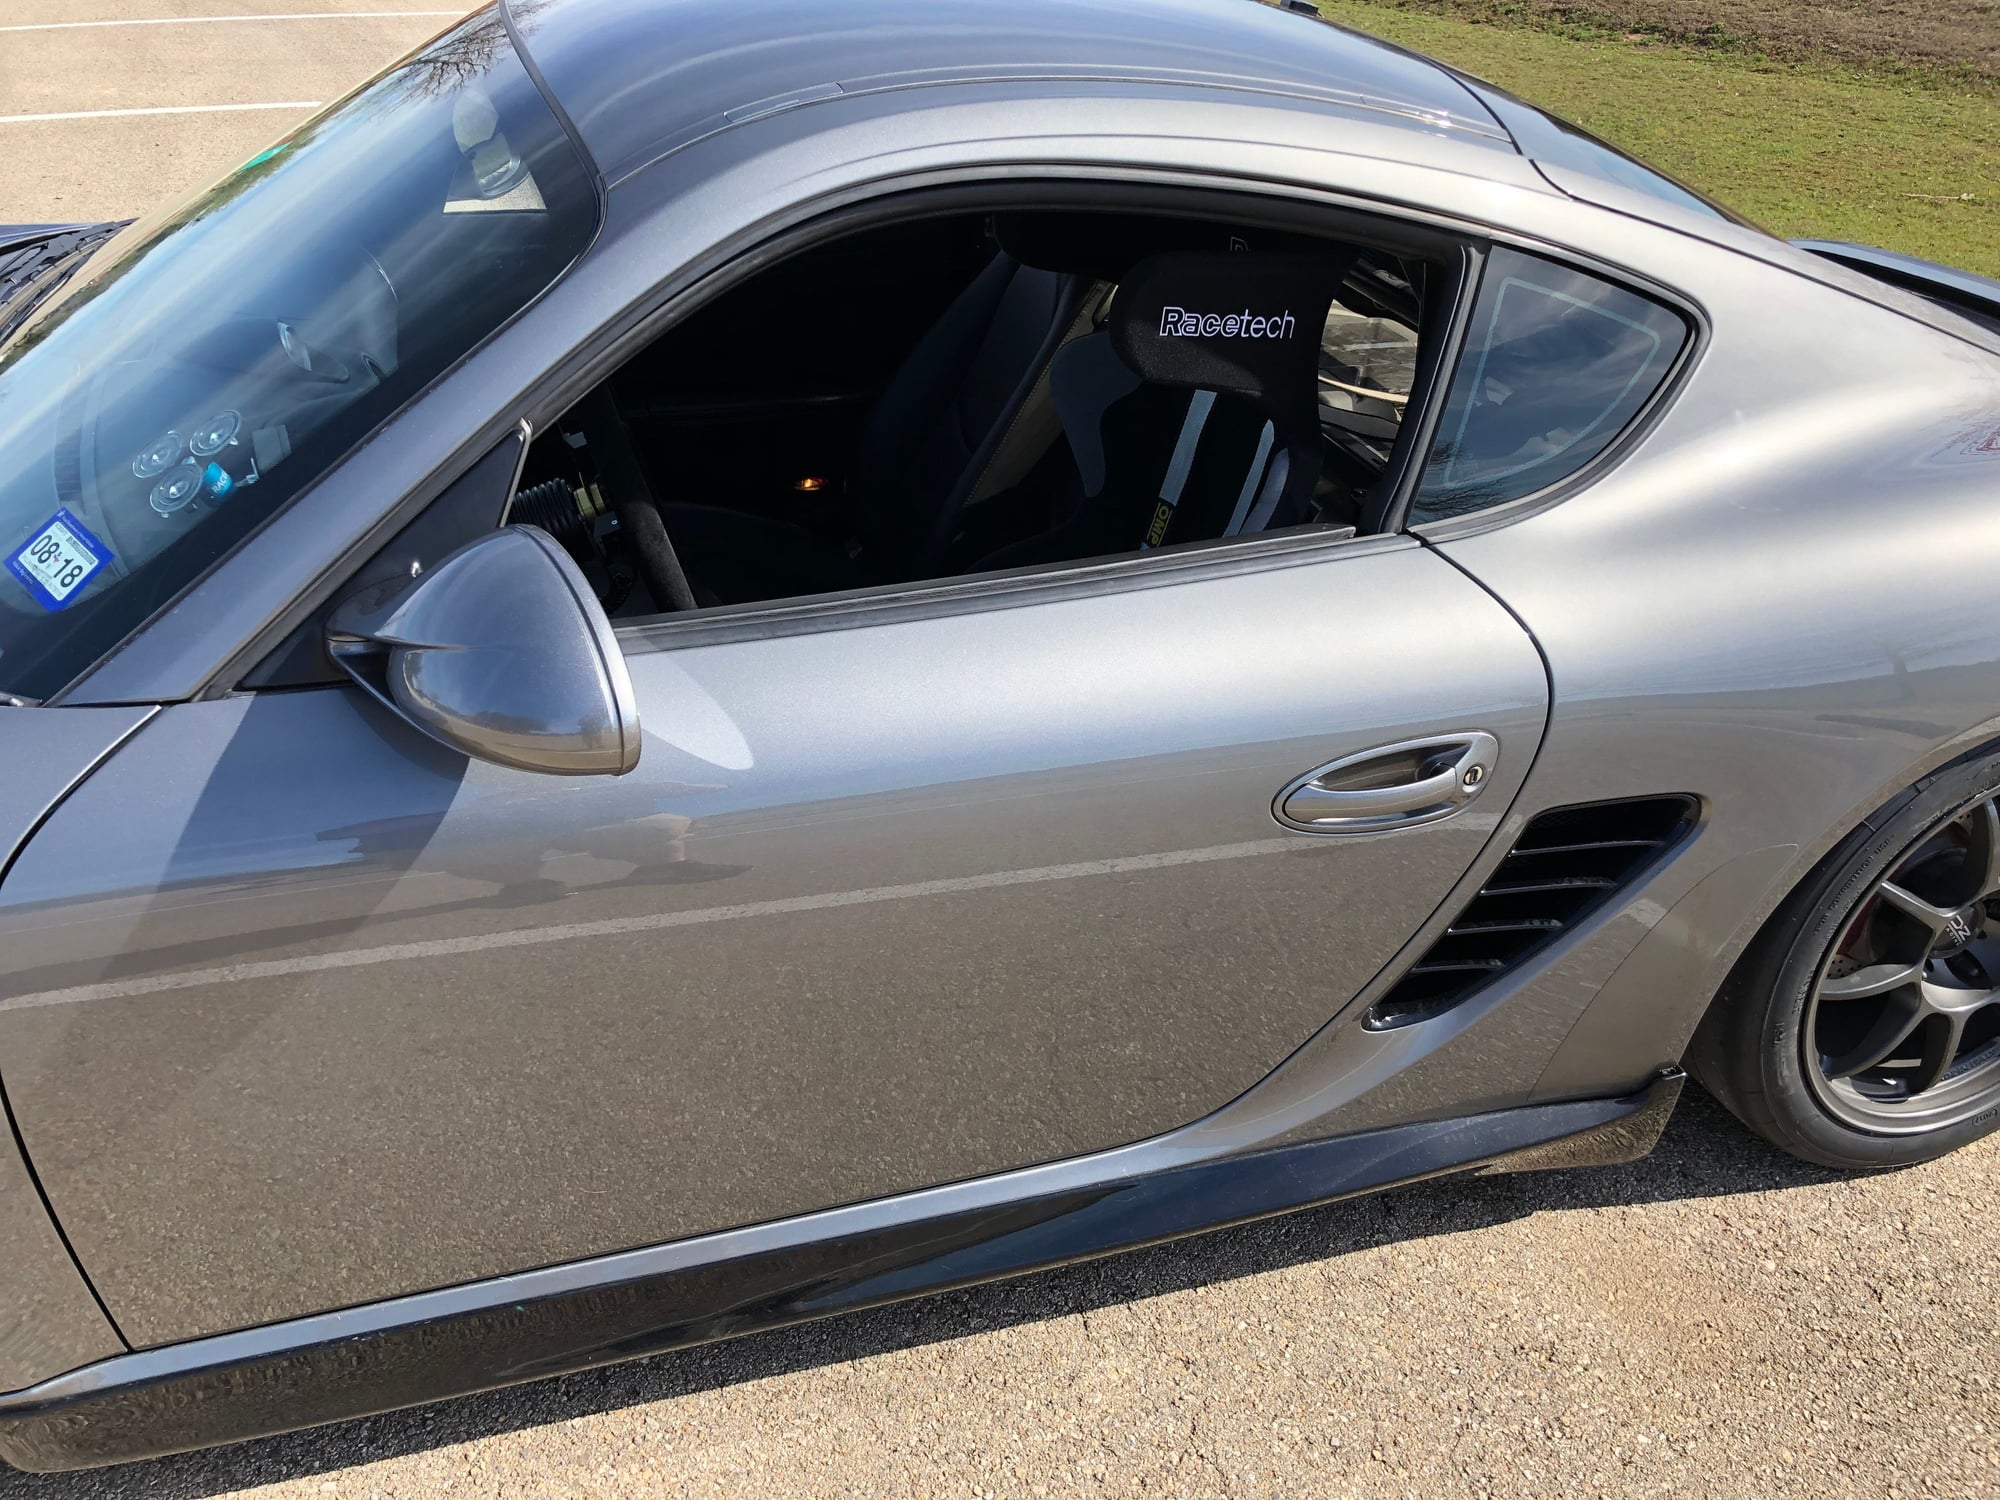 2009 Porsche Cayman - 2009 987.2 Cayman S PDK - HPDE Prepped - Used - VIN WP0AB29849U780187 - 49,400 Miles - 6 cyl - 2WD - Automatic - Hatchback - Gray - Austin, TX 78758, United States